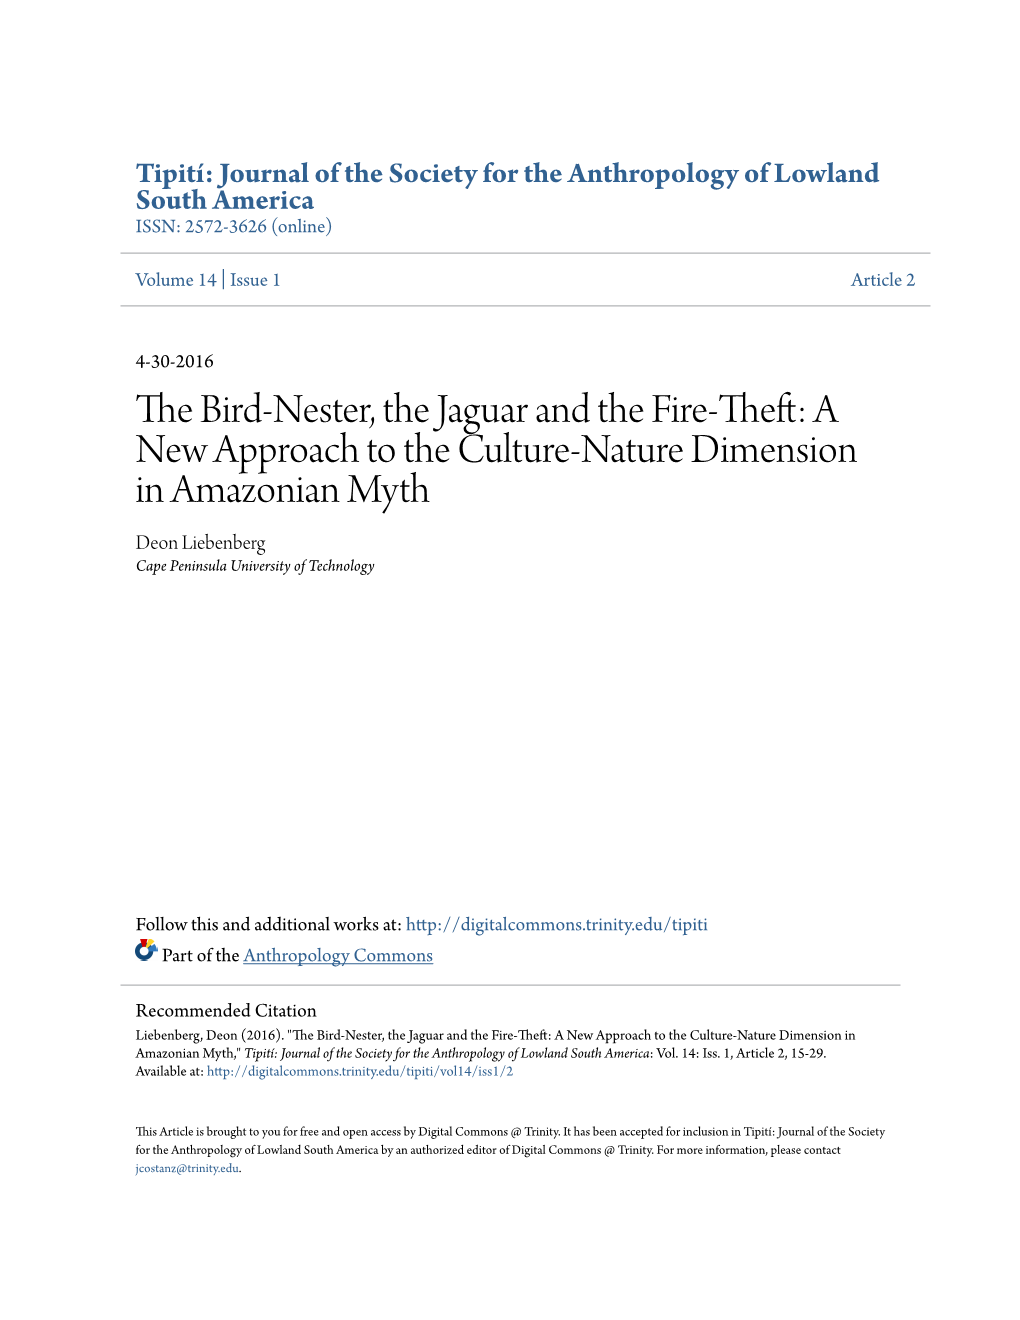 The Bird-Nester, the Jaguar and the Fire-Theft: a New Approach to the Culture-Nature Dimension in Amazonian Myth